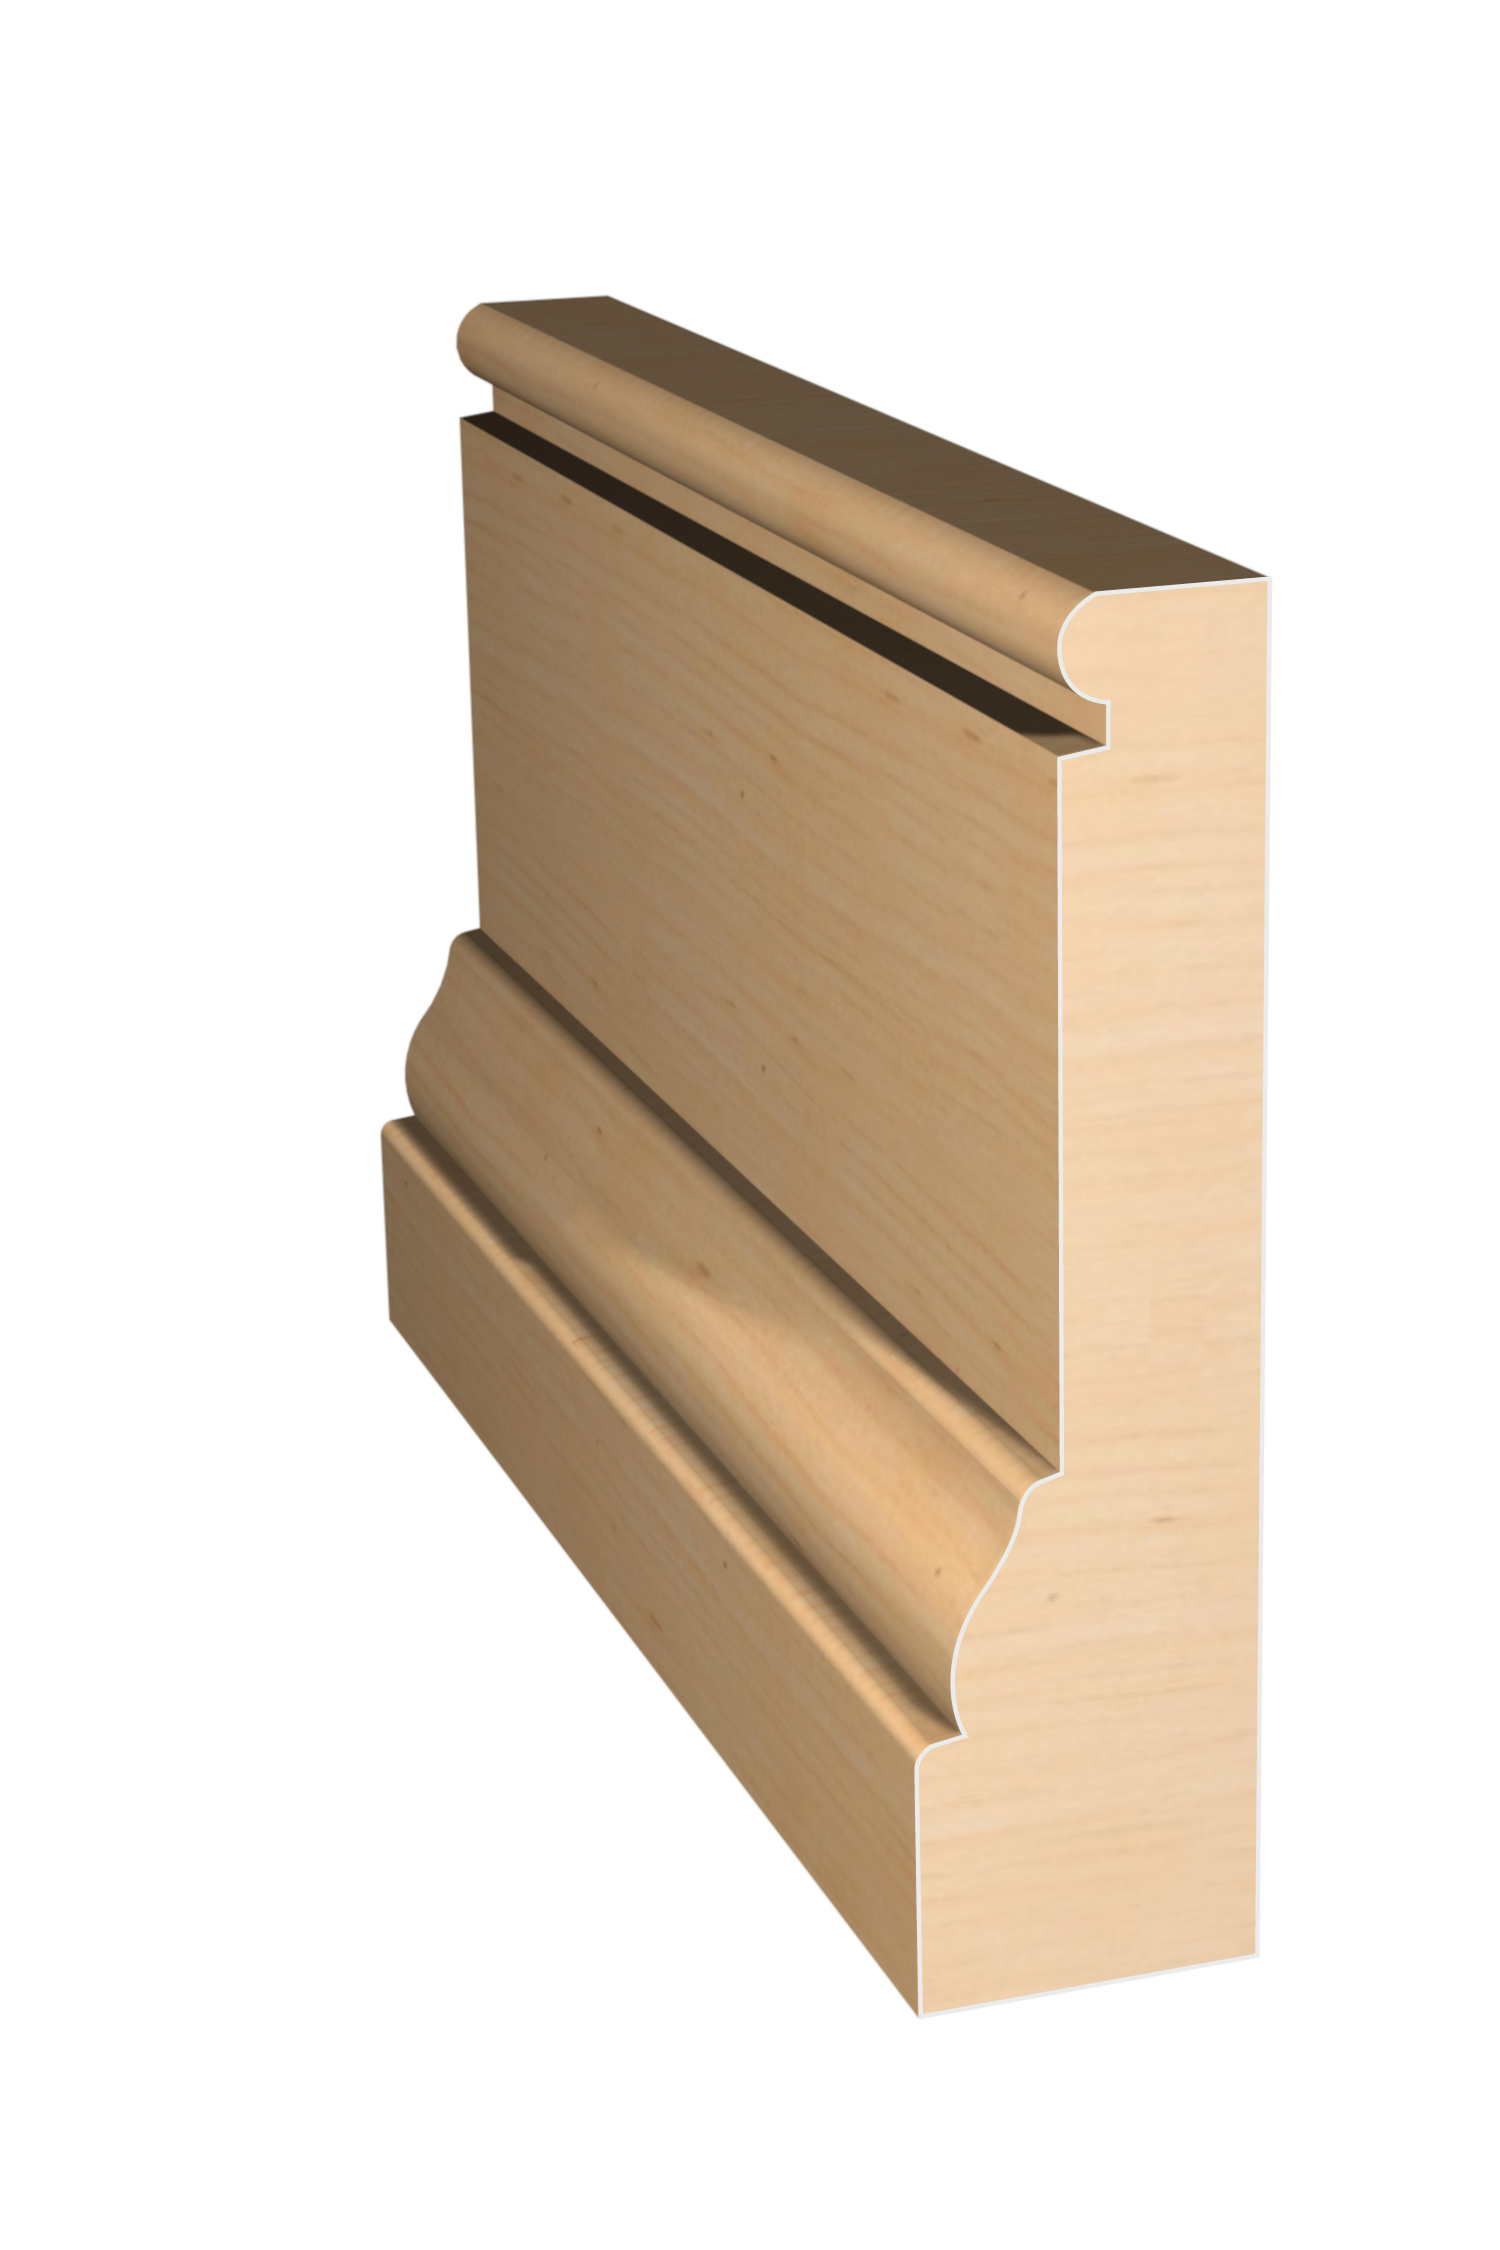 Three dimensional rendering of custom casing wood molding CAPL3781 made by Public Lumber Company in Detroit.